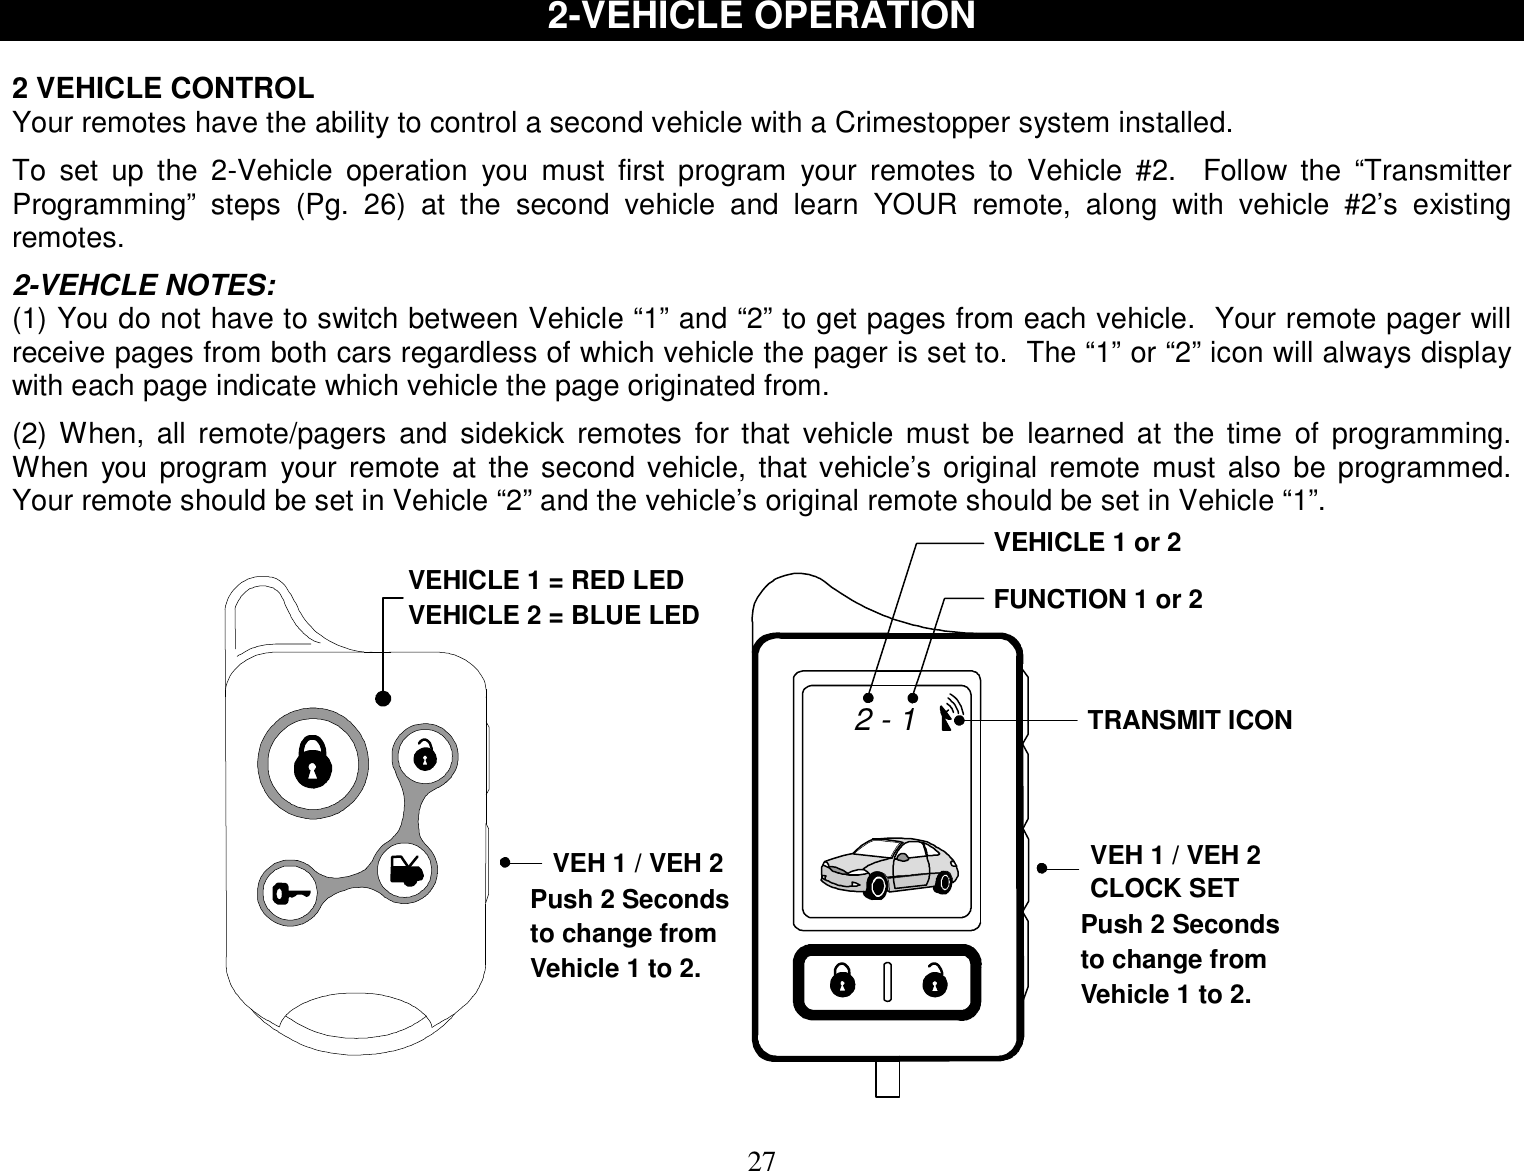  27 2-VEHICLE OPERATION   2 VEHICLE CONTROL Your remotes have the ability to control a second vehicle with a Crimestopper system installed.  To set up the 2-Vehicle operation you must first program your remotes to Vehicle #2.  Follow the “Transmitter Programming” steps (Pg. 26) at the second vehicle and learn YOUR remote, along with vehicle #2’s existing remotes.  2-VEHCLE NOTES: (1) You do not have to switch between Vehicle “1” and “2” to get pages from each vehicle.  Your remote pager will receive pages from both cars regardless of which vehicle the pager is set to.  The “1” or “2” icon will always display with each page indicate which vehicle the page originated from.  (2) When, all remote/pagers and sidekick remotes for that vehicle must be learned at the time of programming.  When you program your remote at the second vehicle, that vehicle’s original remote must also be programmed.  Your remote should be set in Vehicle “2” and the vehicle’s original remote should be set in Vehicle “1”. TRANSMIT ICONVEHICLE 1 or 2FUNCTION 1 or 2VEH 1 / VEH 2CLOCK SET2 - 1VEHICLE 1 = RED LEDVEHICLE 2 = BLUE LEDVEH 1 / VEH 2Push 2 Secondsto change fromVehicle 1 to 2.Push 2 Secondsto change fromVehicle 1 to 2.  